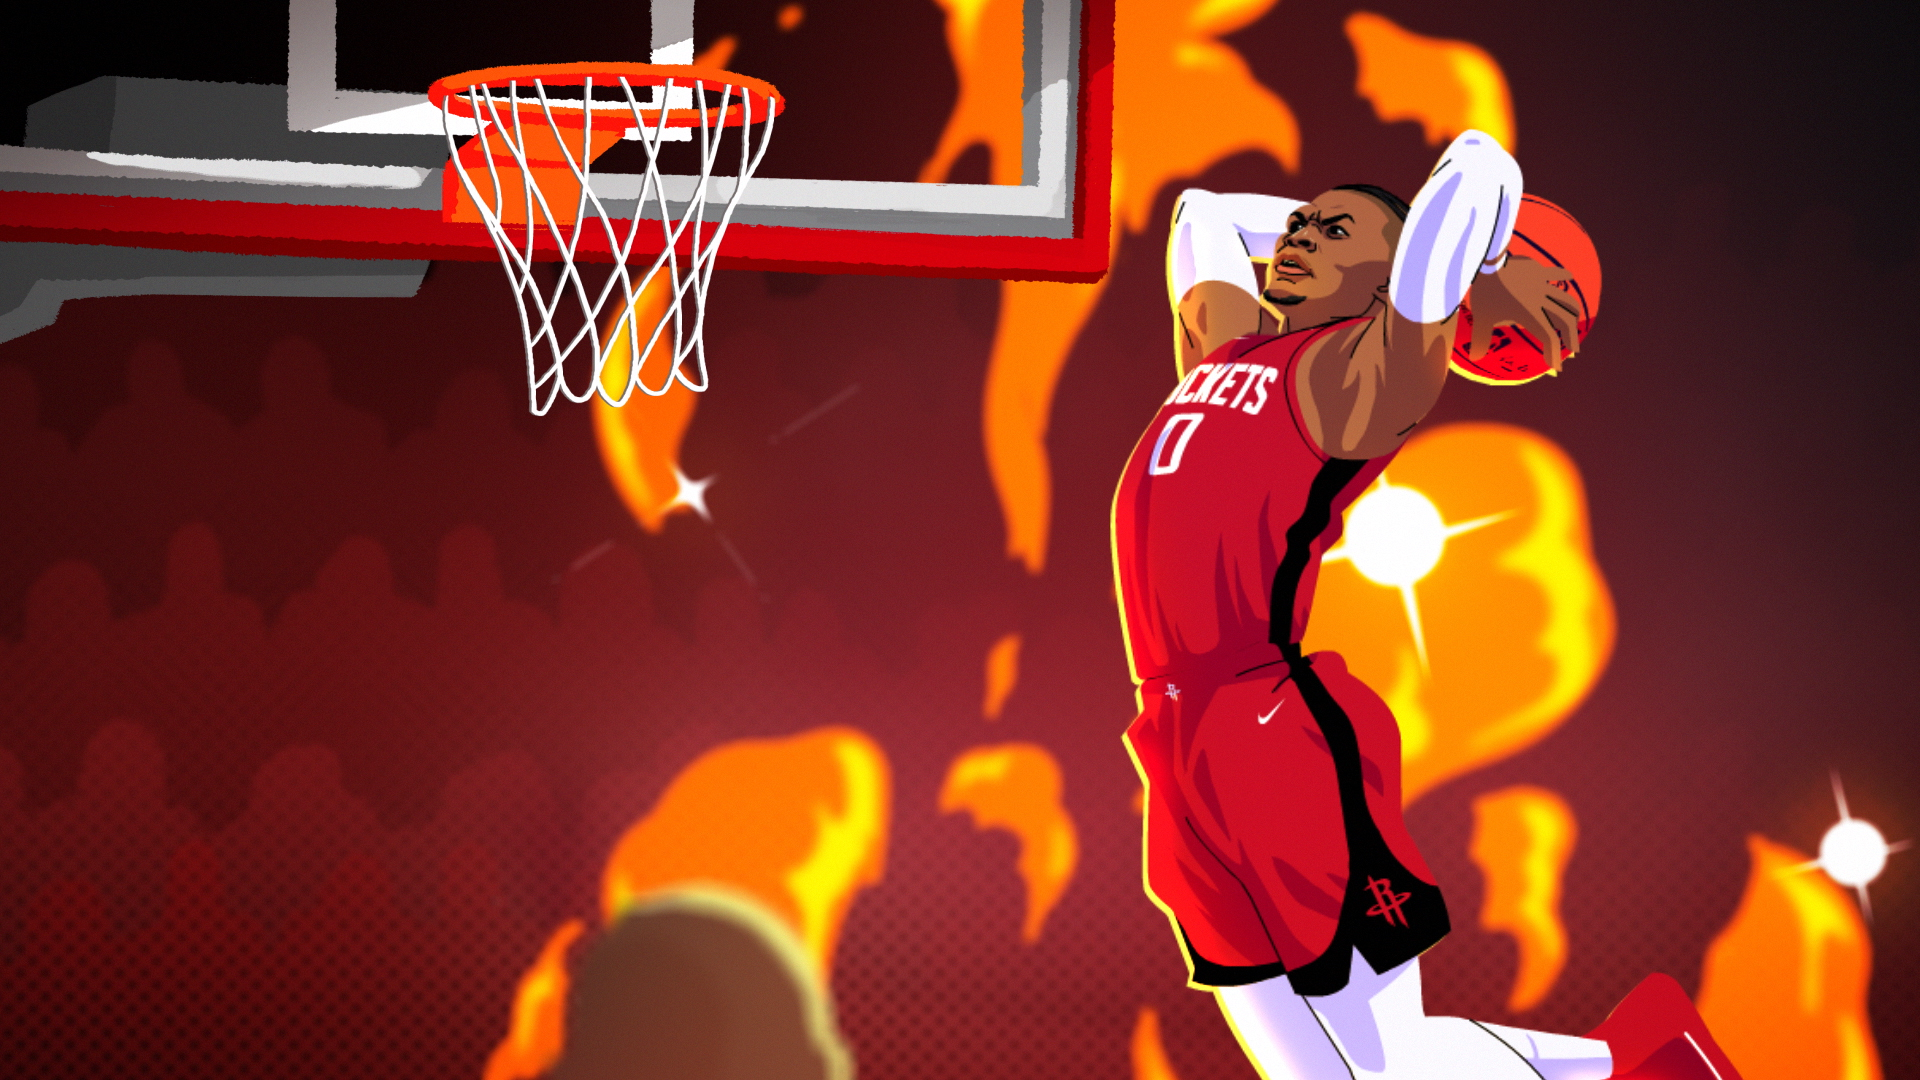 Nba basketball and transparent png images free download. 